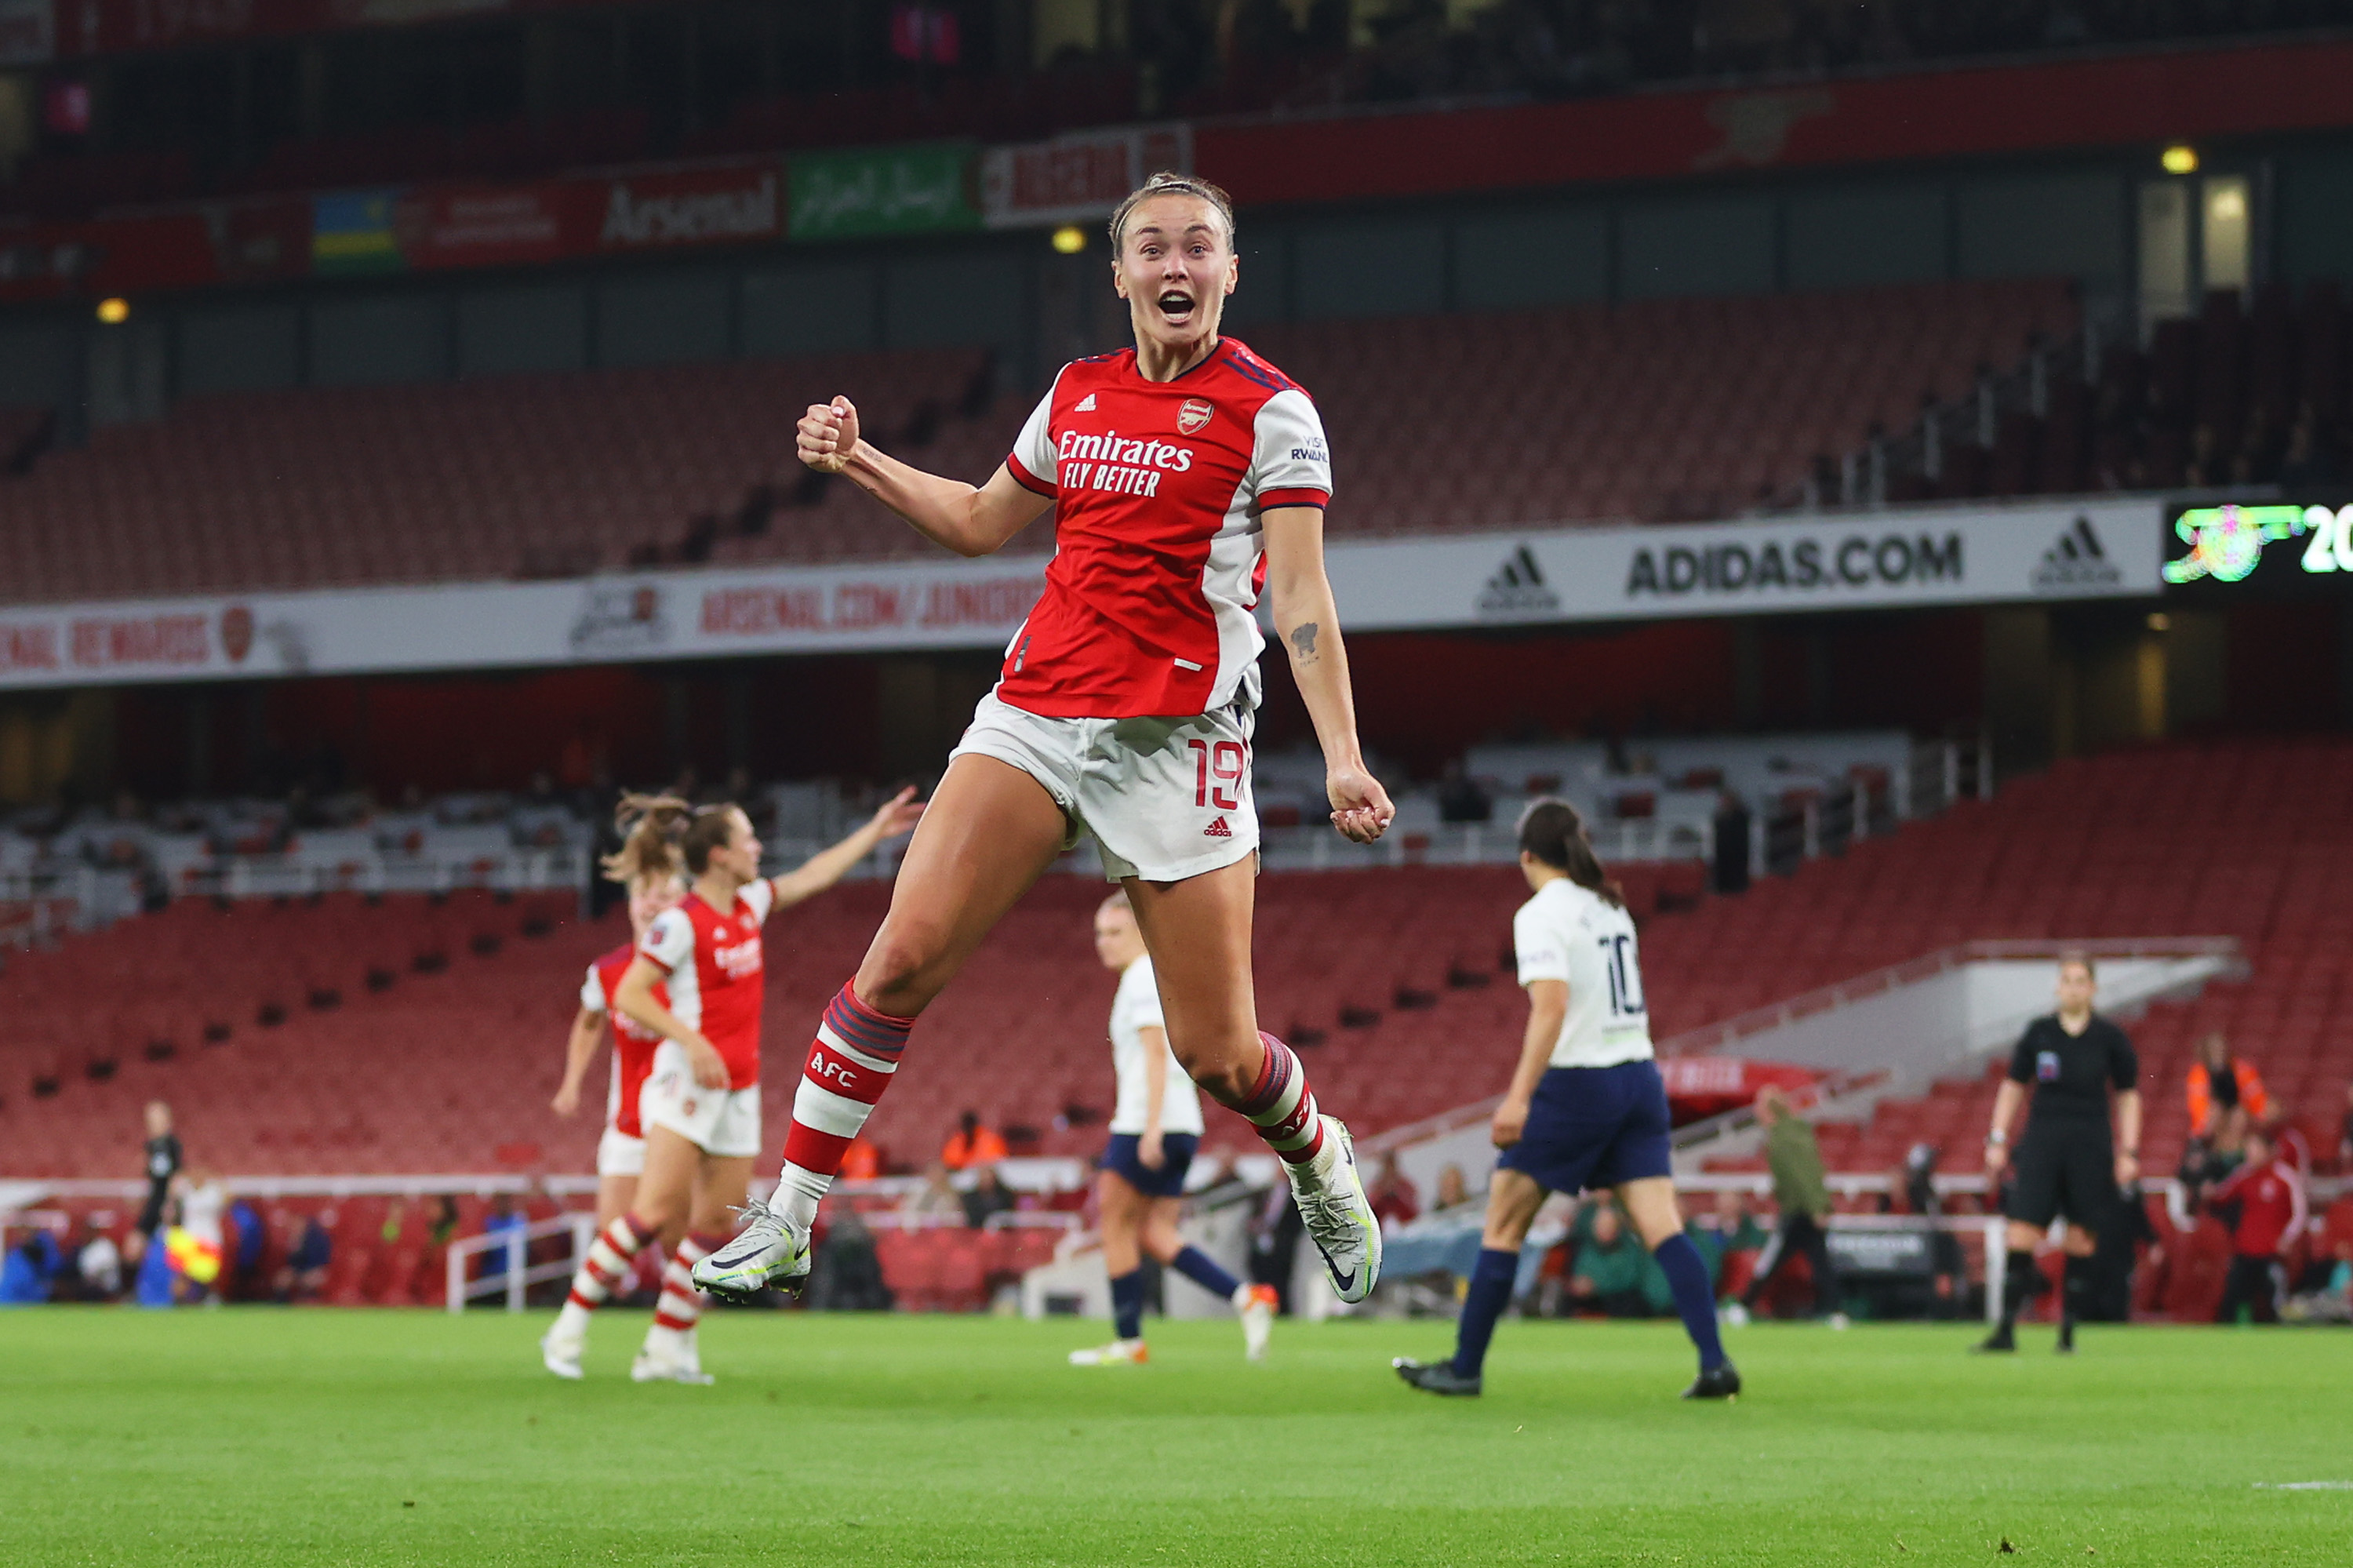 arsenal women v tottenham hotspur women barclays fa womens super league 6 | Highlights: West Ham hold Arsenal Women to 0-0 draw as Chelsea go top of WSL (with video) | The Paradise